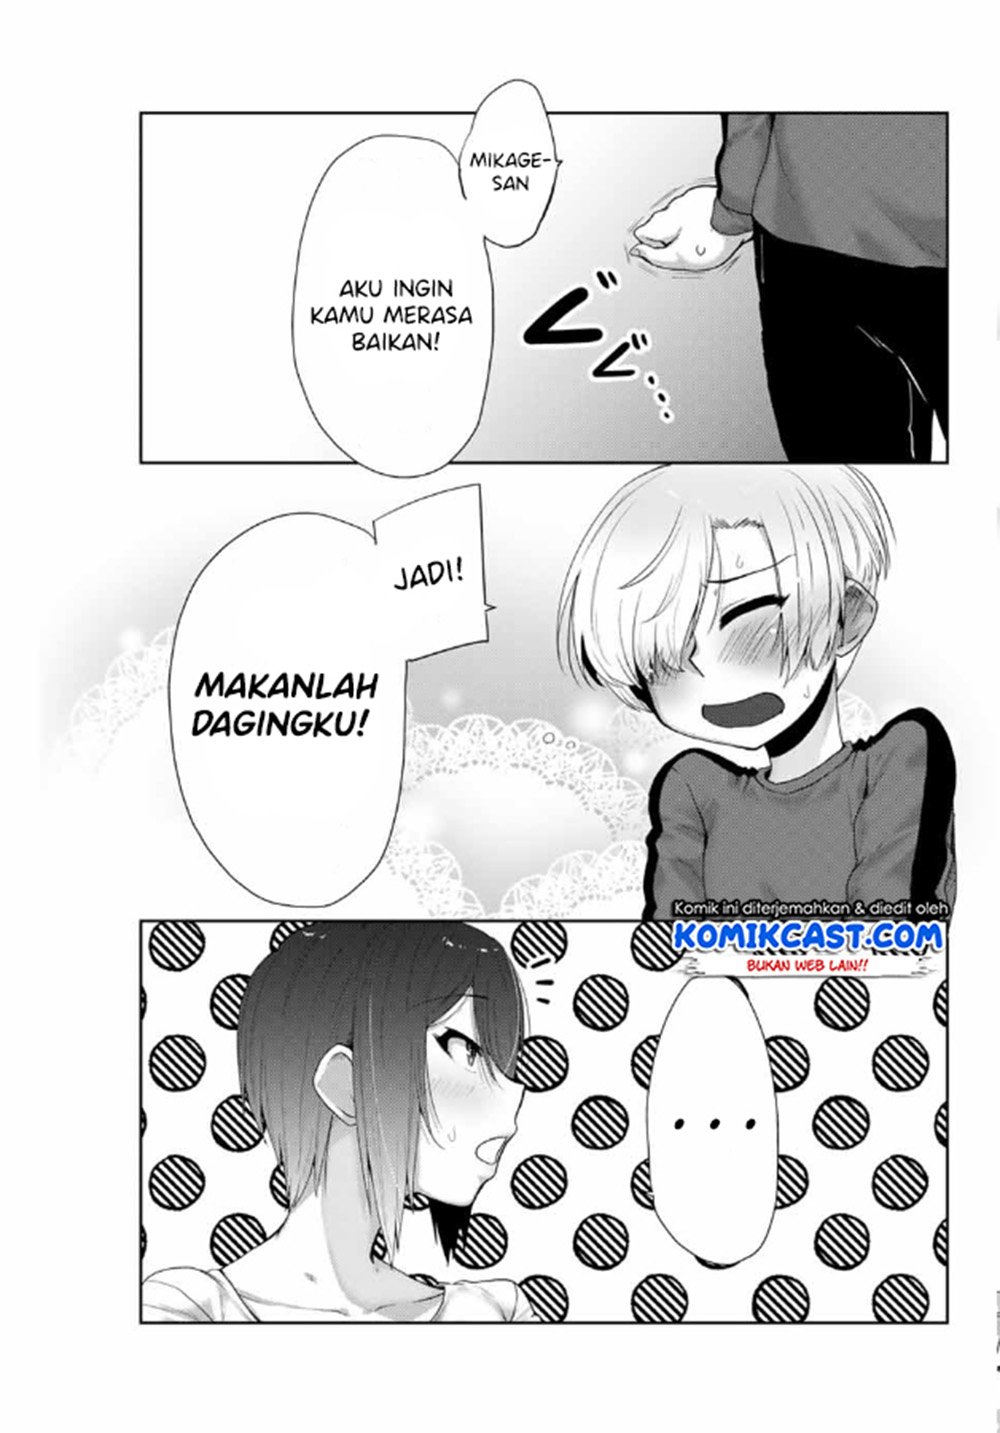 The Girl with a Kansai Accent and the Pure Boy Chapter 08